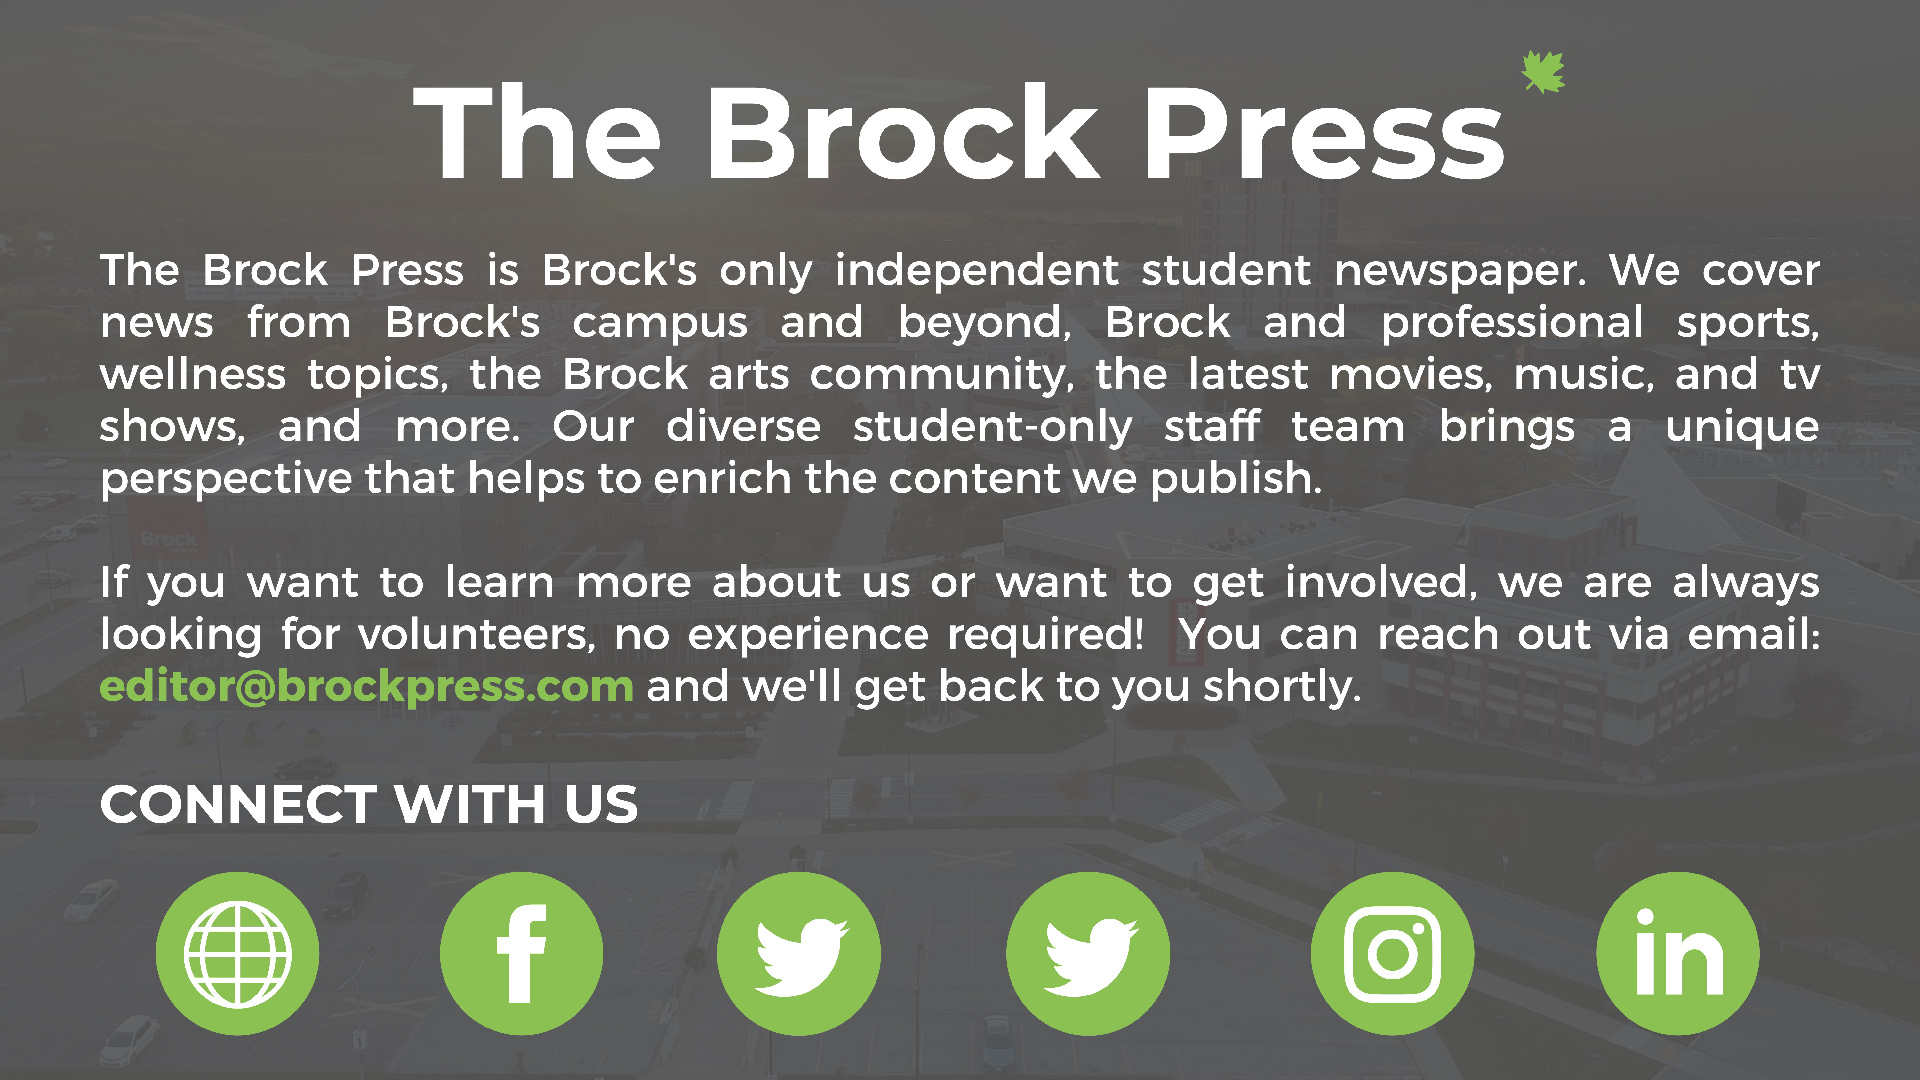 All about The Brock Press